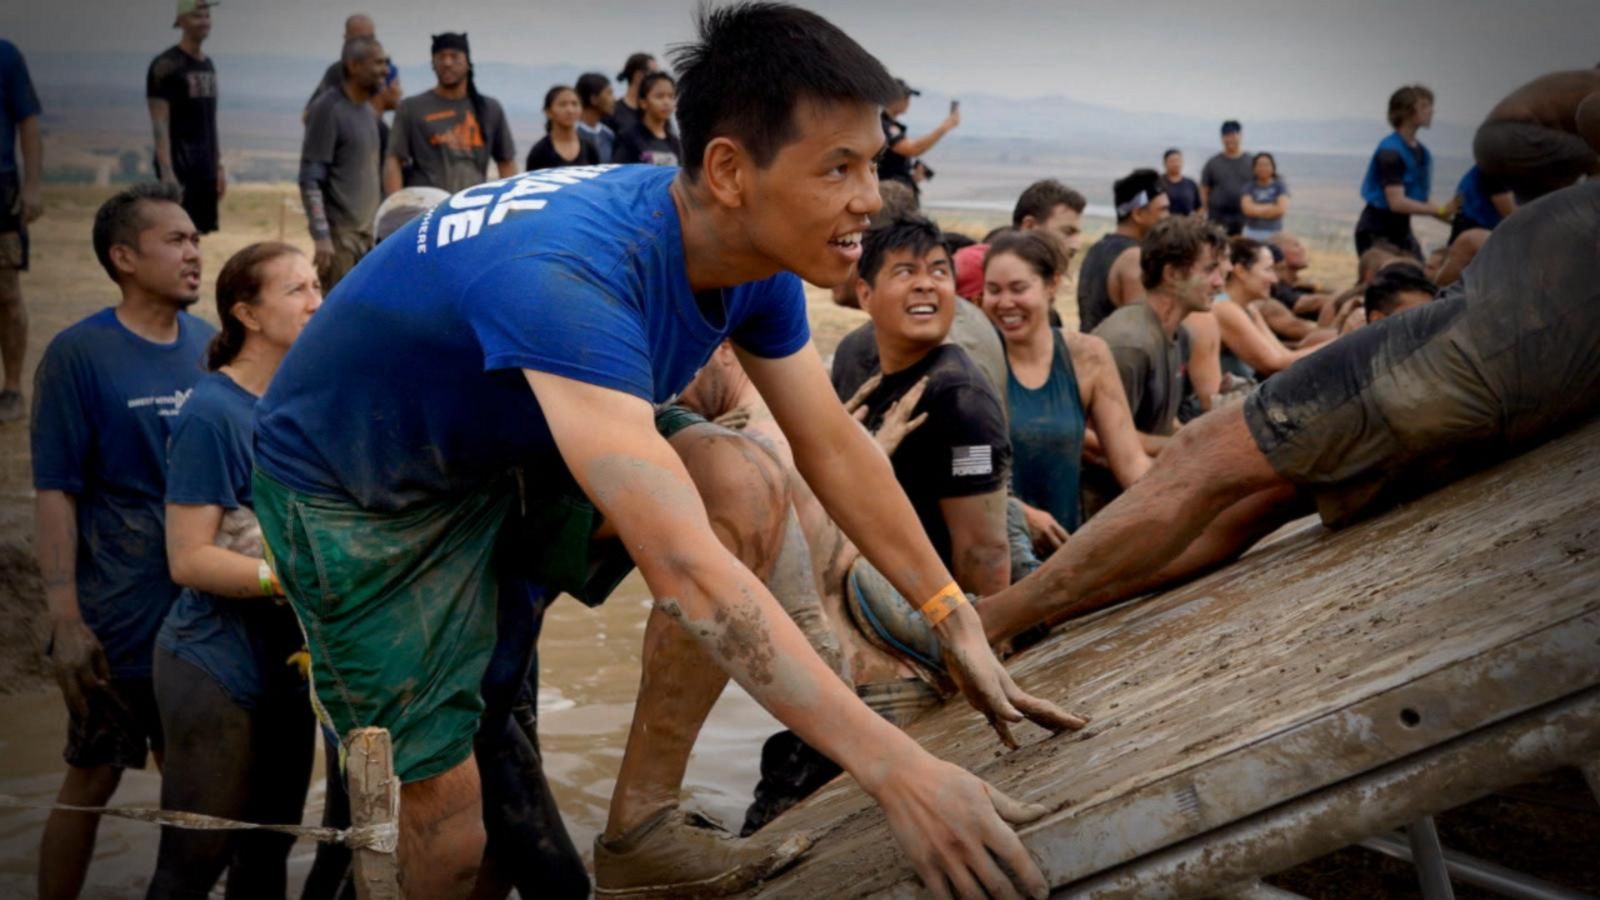 Tough Mudder Race in California Gets Even Tougher After Illness Spreads